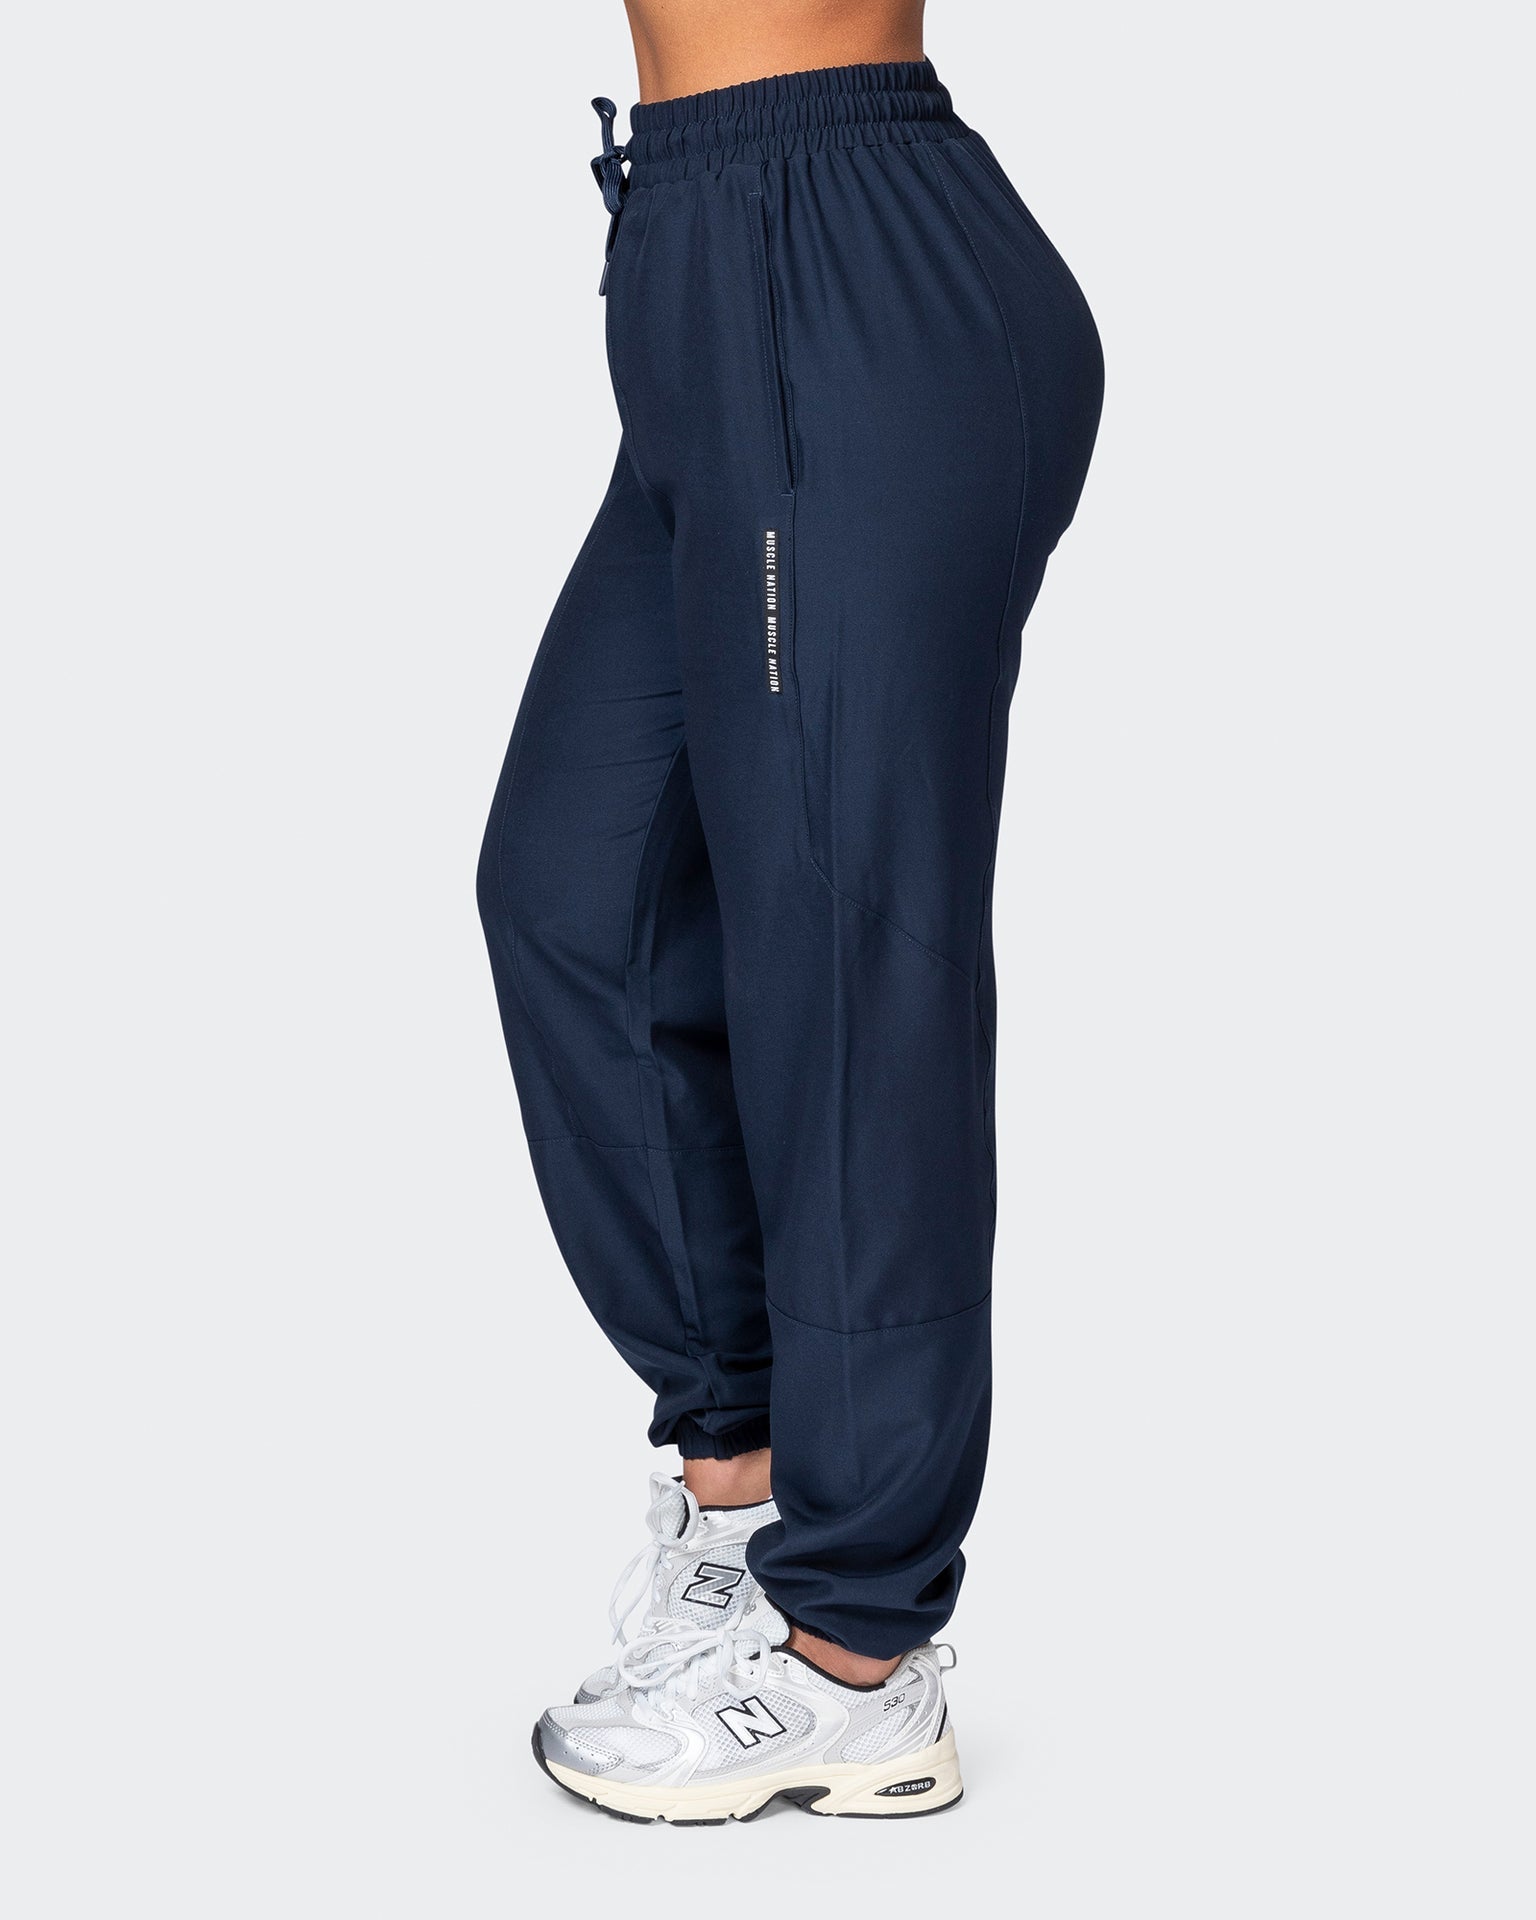 Muscle Nation Track Pants Womens Dynamic Lightweight Joggers - Odyssey